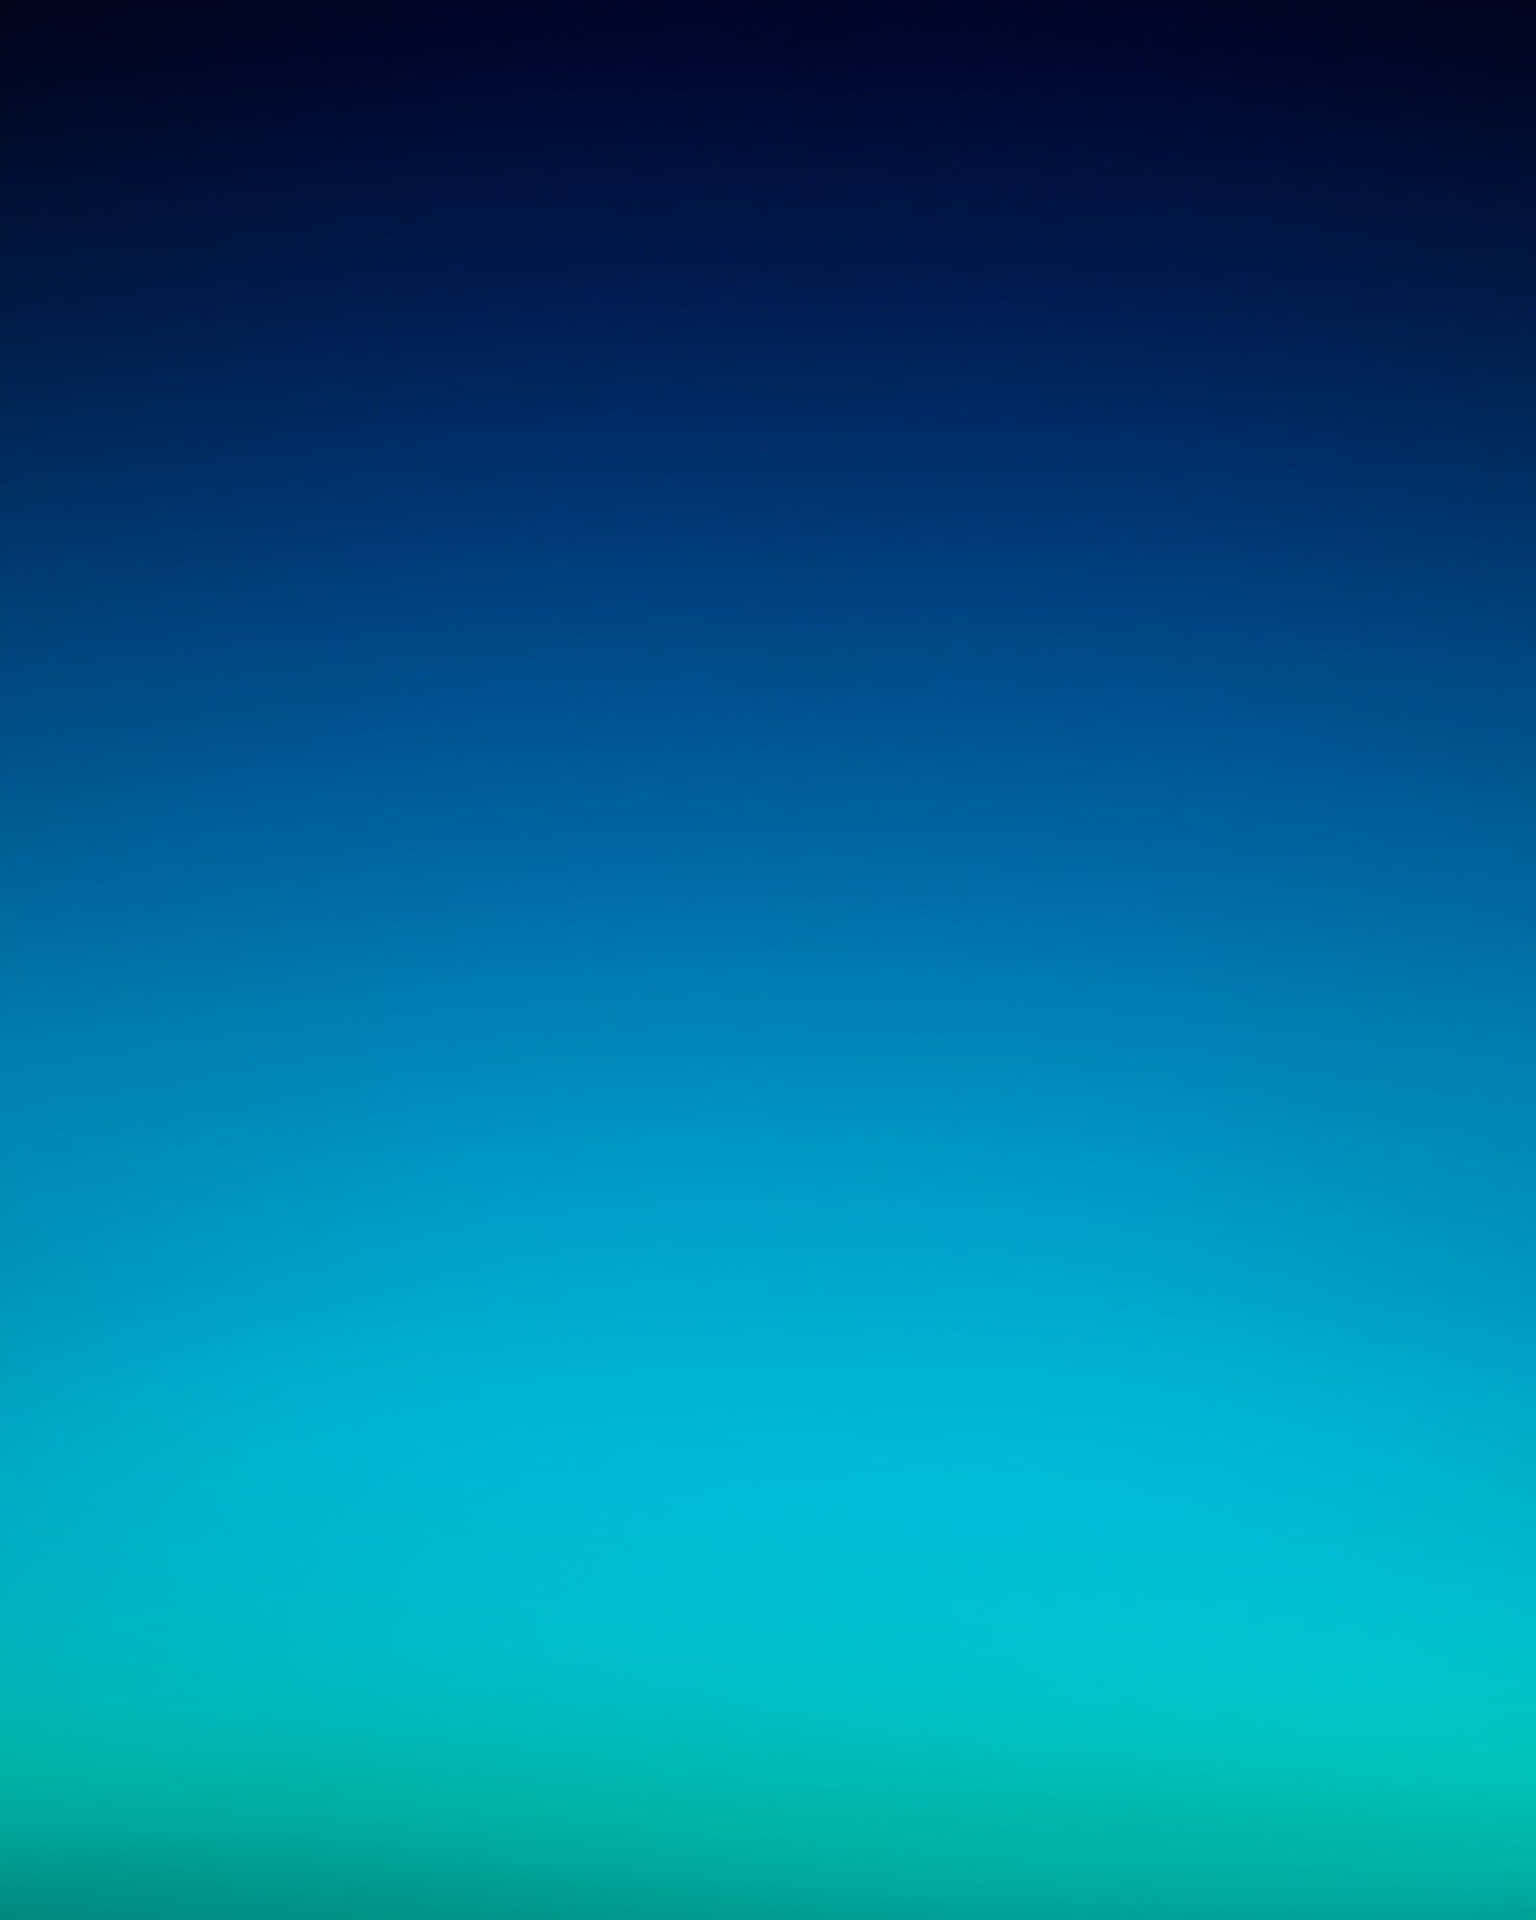 Blue Ombre Background Black To Light Blue Texture